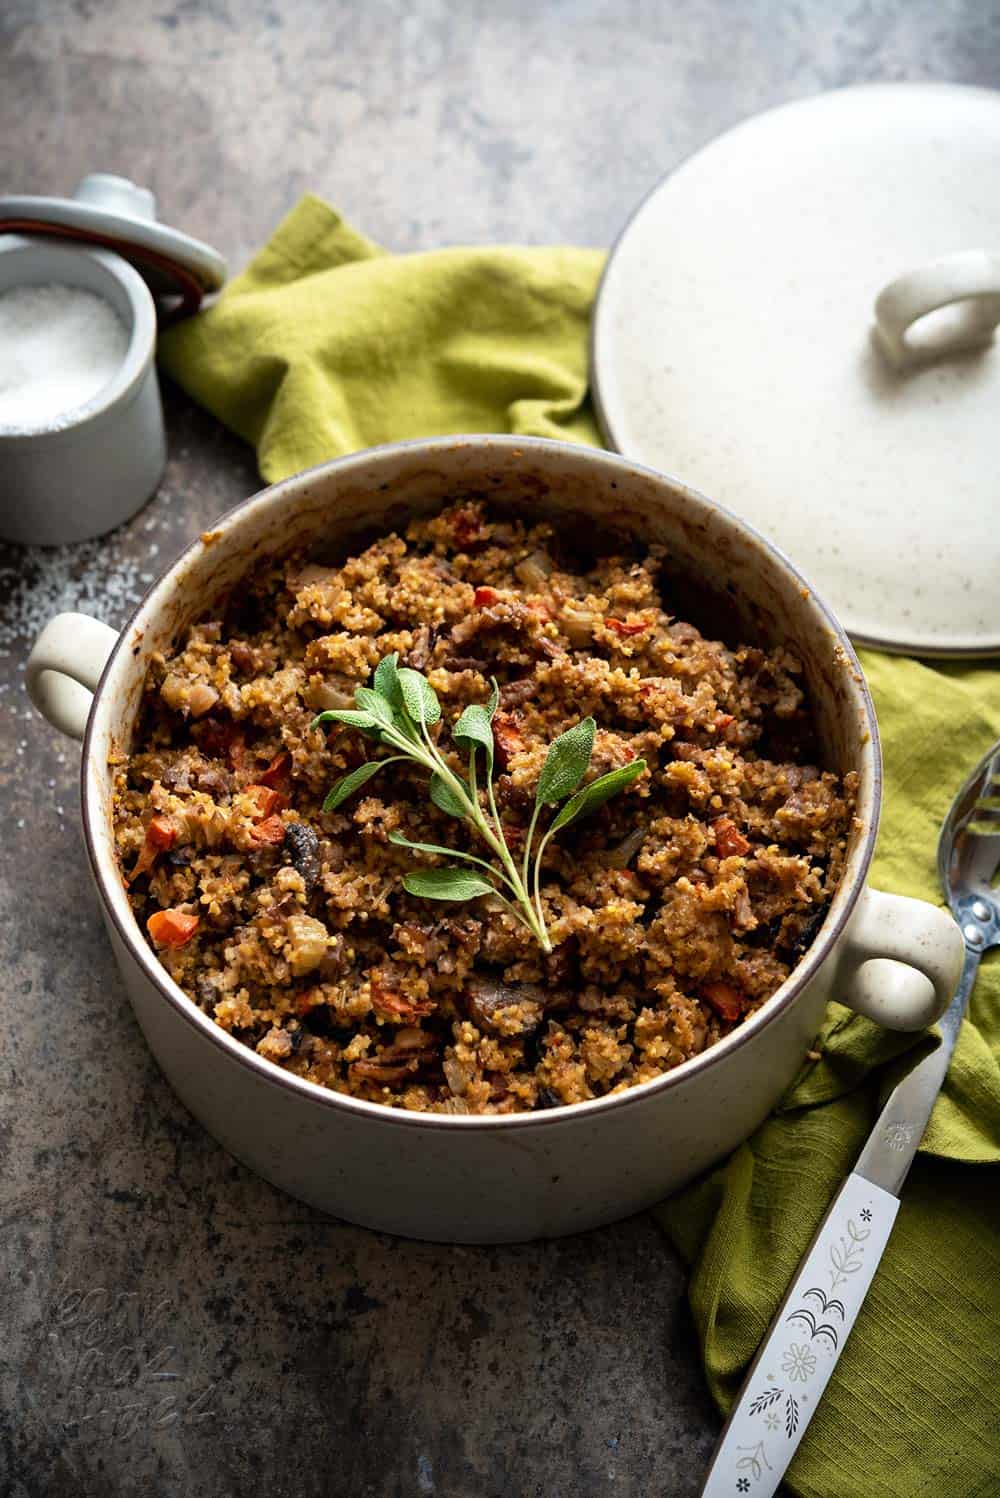 Stuffing is one of my favorite sides, at holiday dinners. So that no one feels left out, I've made this tasty, Gluten-free Millet Stuffing for everyone! Plus, it's in the cutest baking dish. #vegan #Danskdesign #dansk #thanksgiving #glutenfree